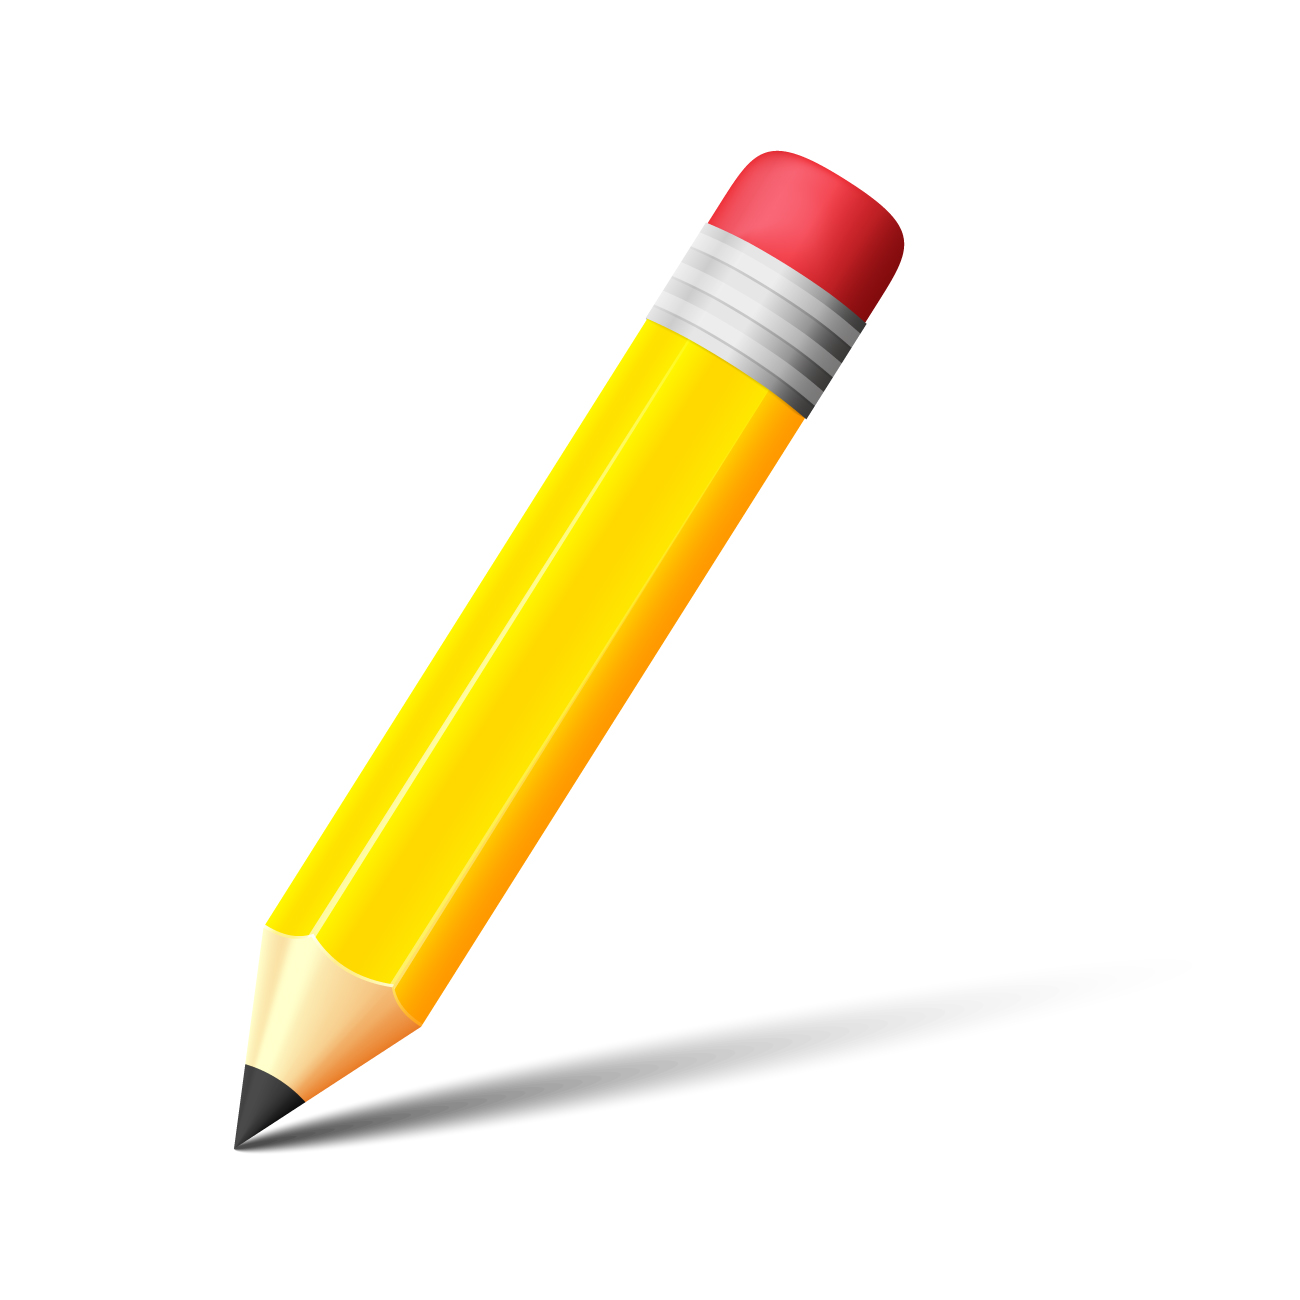 image in article March 30 is National Pencil day